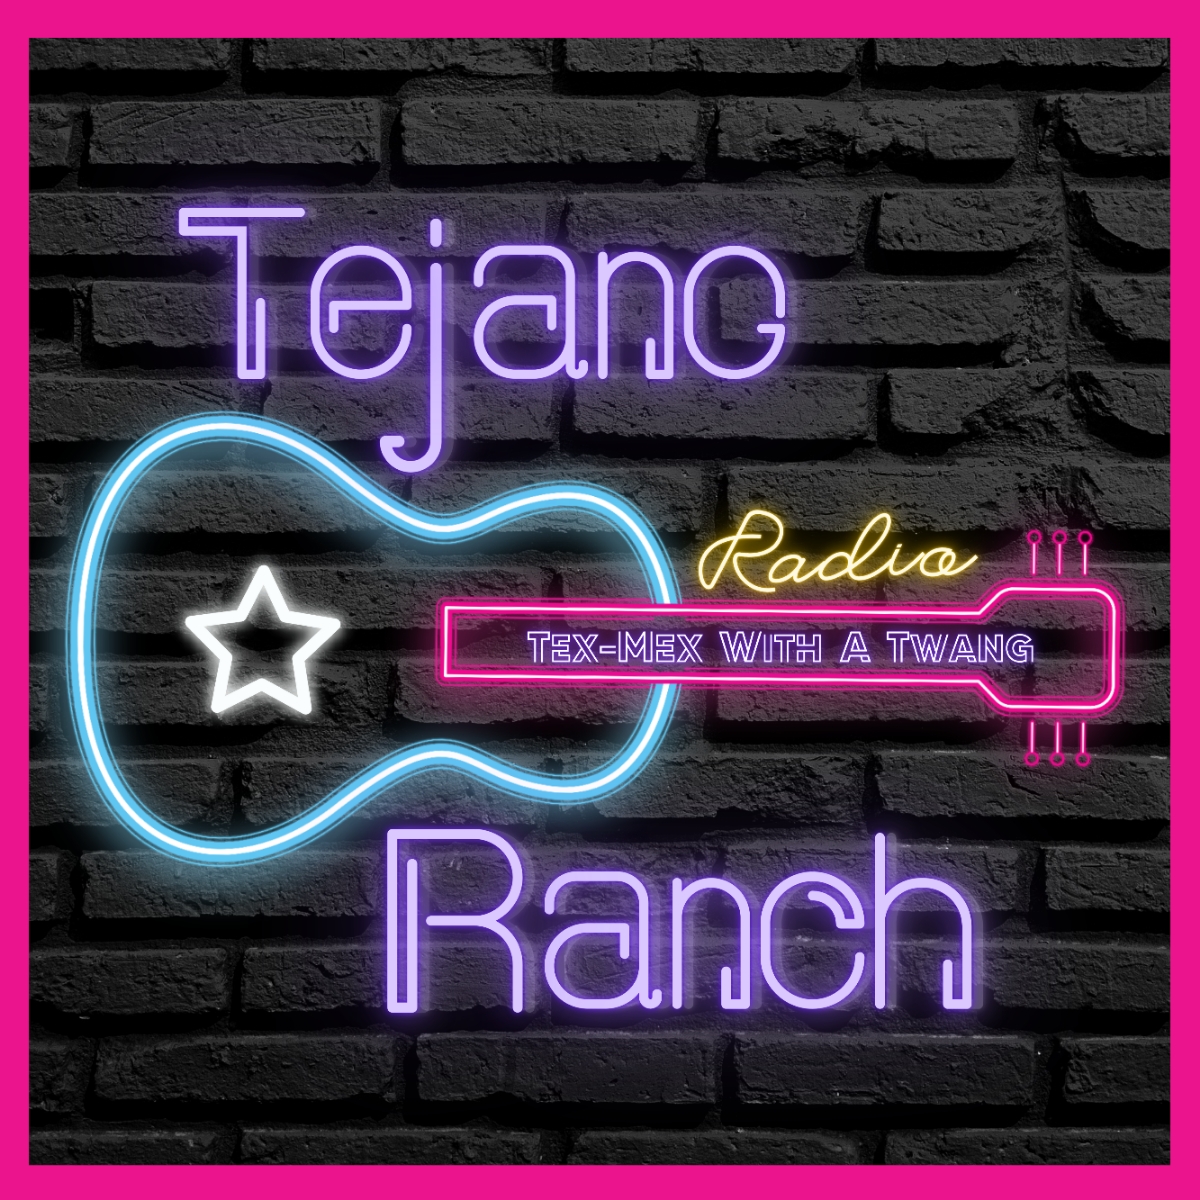 Art for From The Red to Rio Grande by Tejano Ranch Radio 